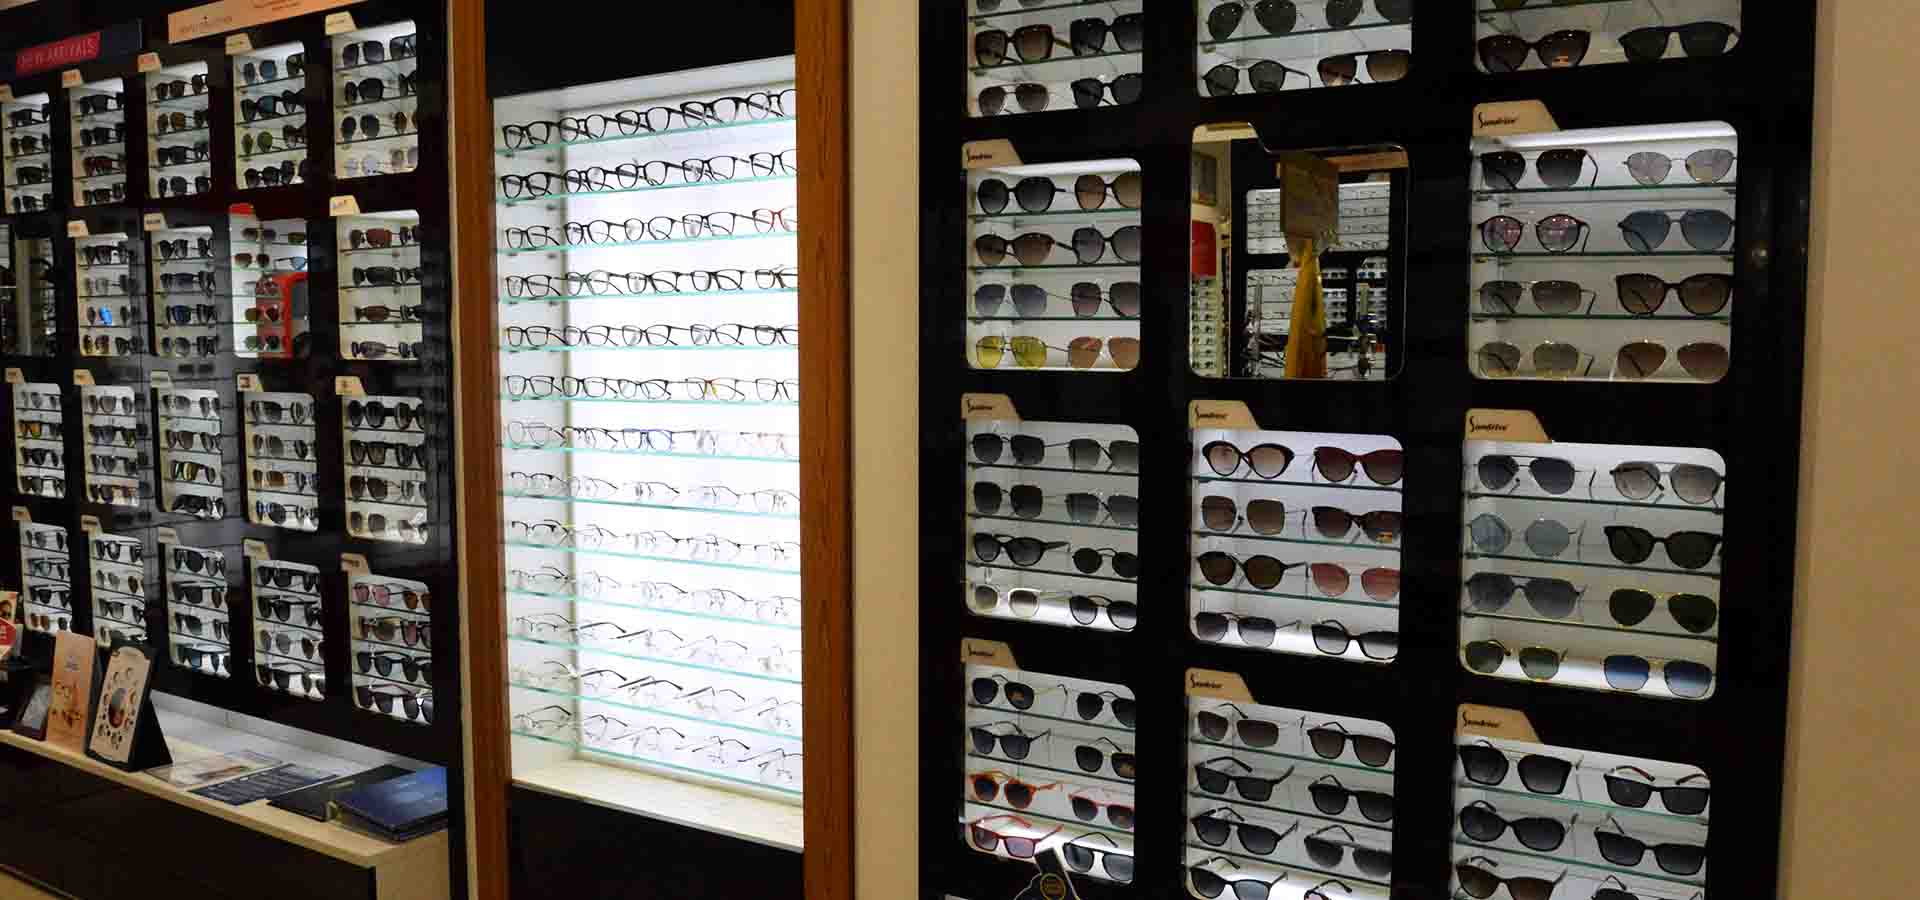 Gkb Opticals store photos in mall